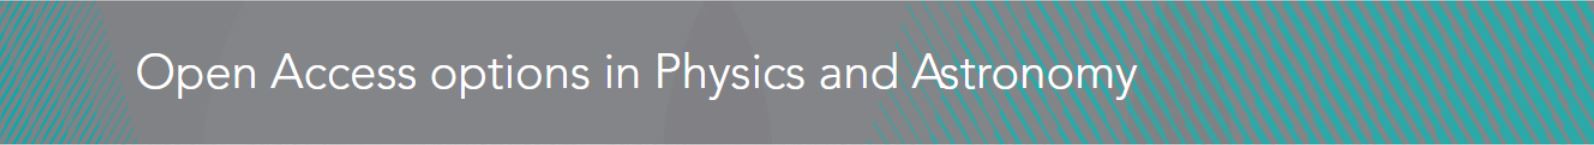 Open Access options in Physics and Astronomy